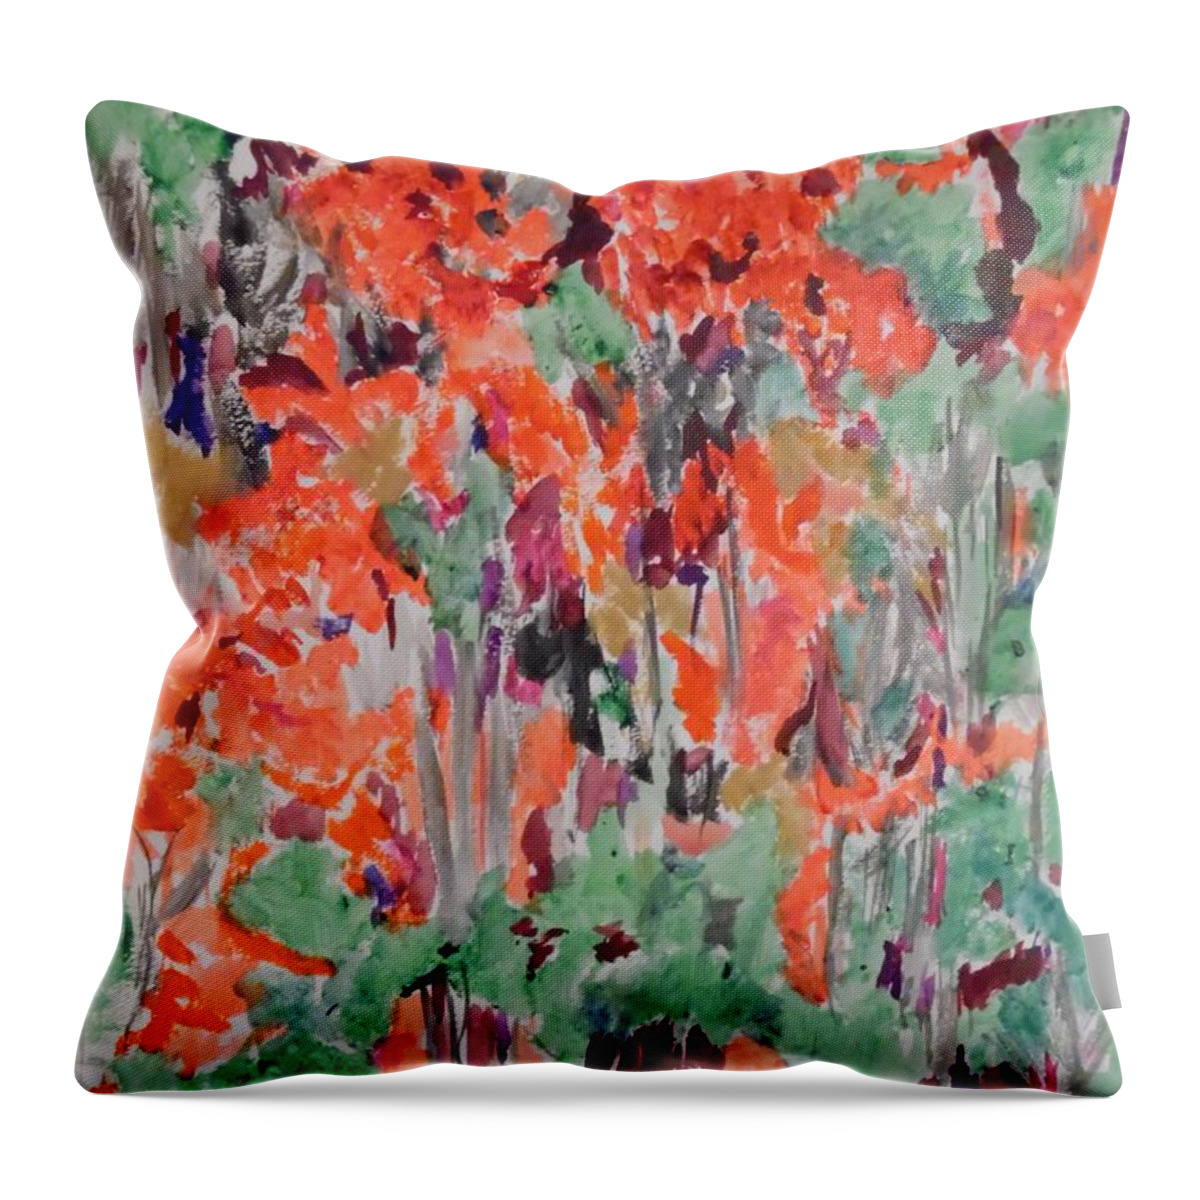 Regal Red Fall Foliage Throw Pillow featuring the painting Regal Red Fall Foliage by Esther Newman-Cohen